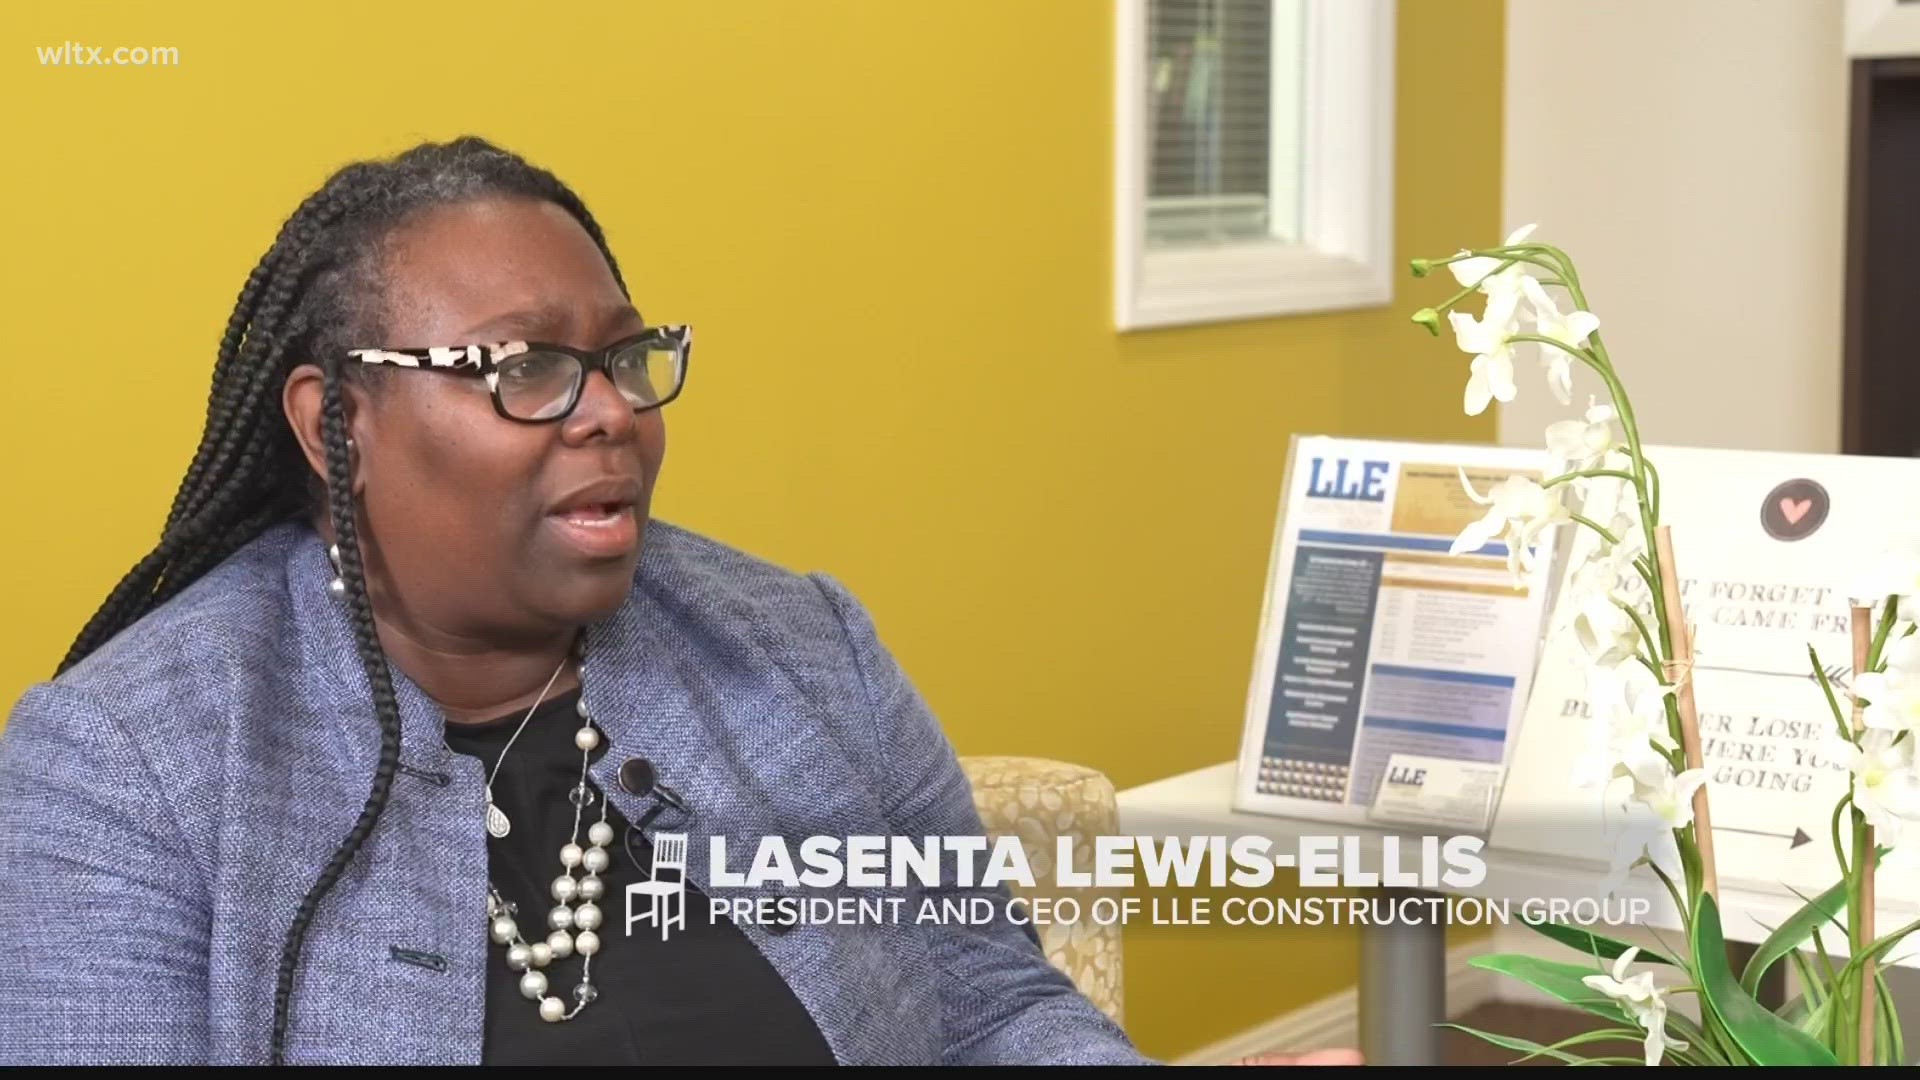 Led by her faith and servant leadership attitude, Lasenta Lewis Ellis is using her talents, resources, and knowledge to help revitalize the community.